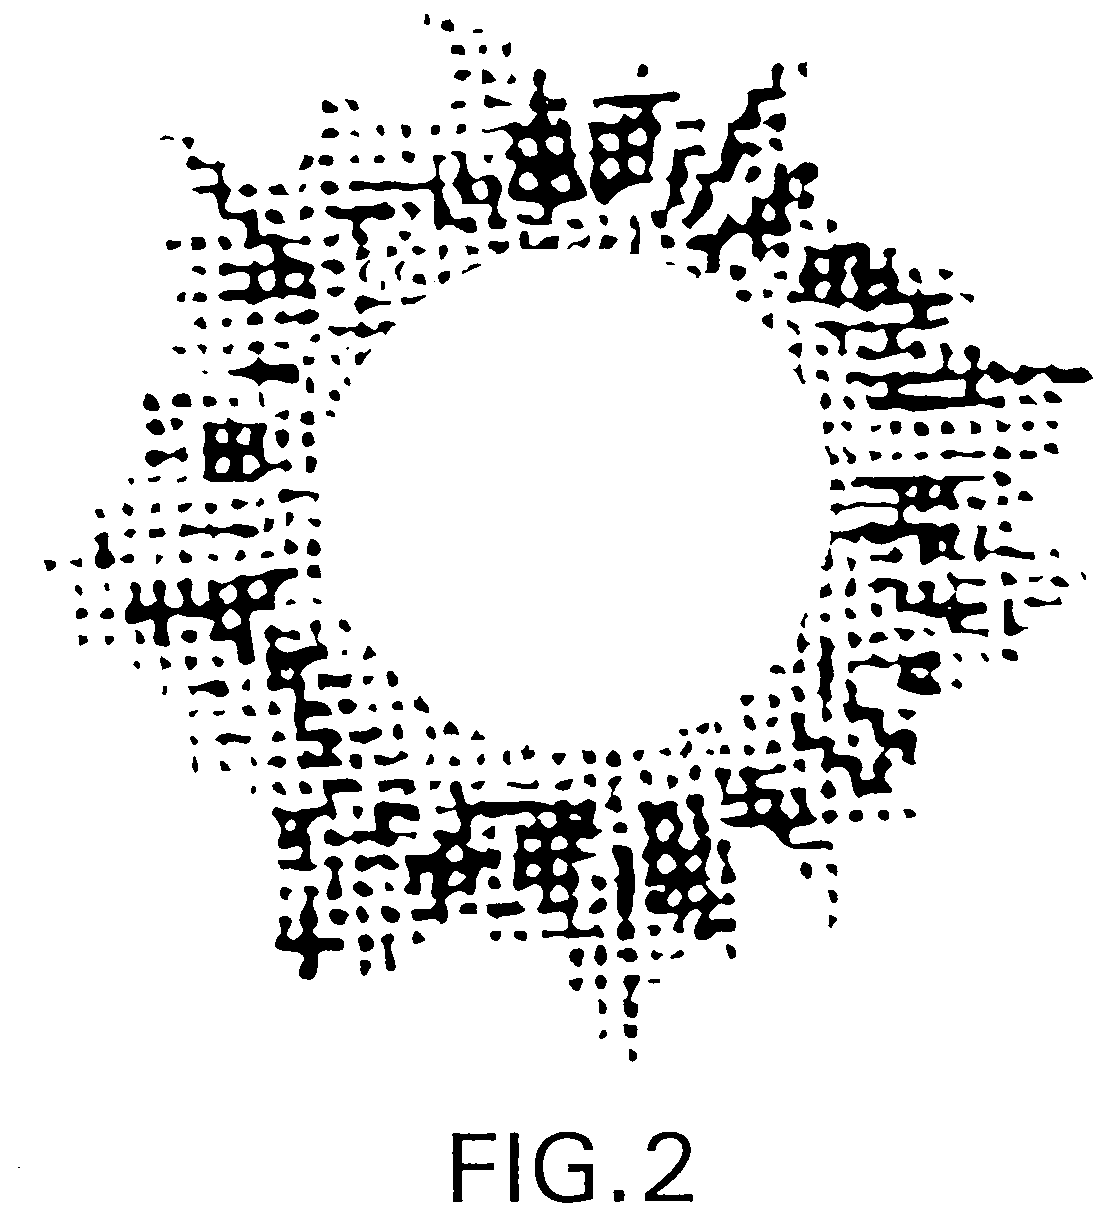 Pad transfer printing method for making colored contact lenses